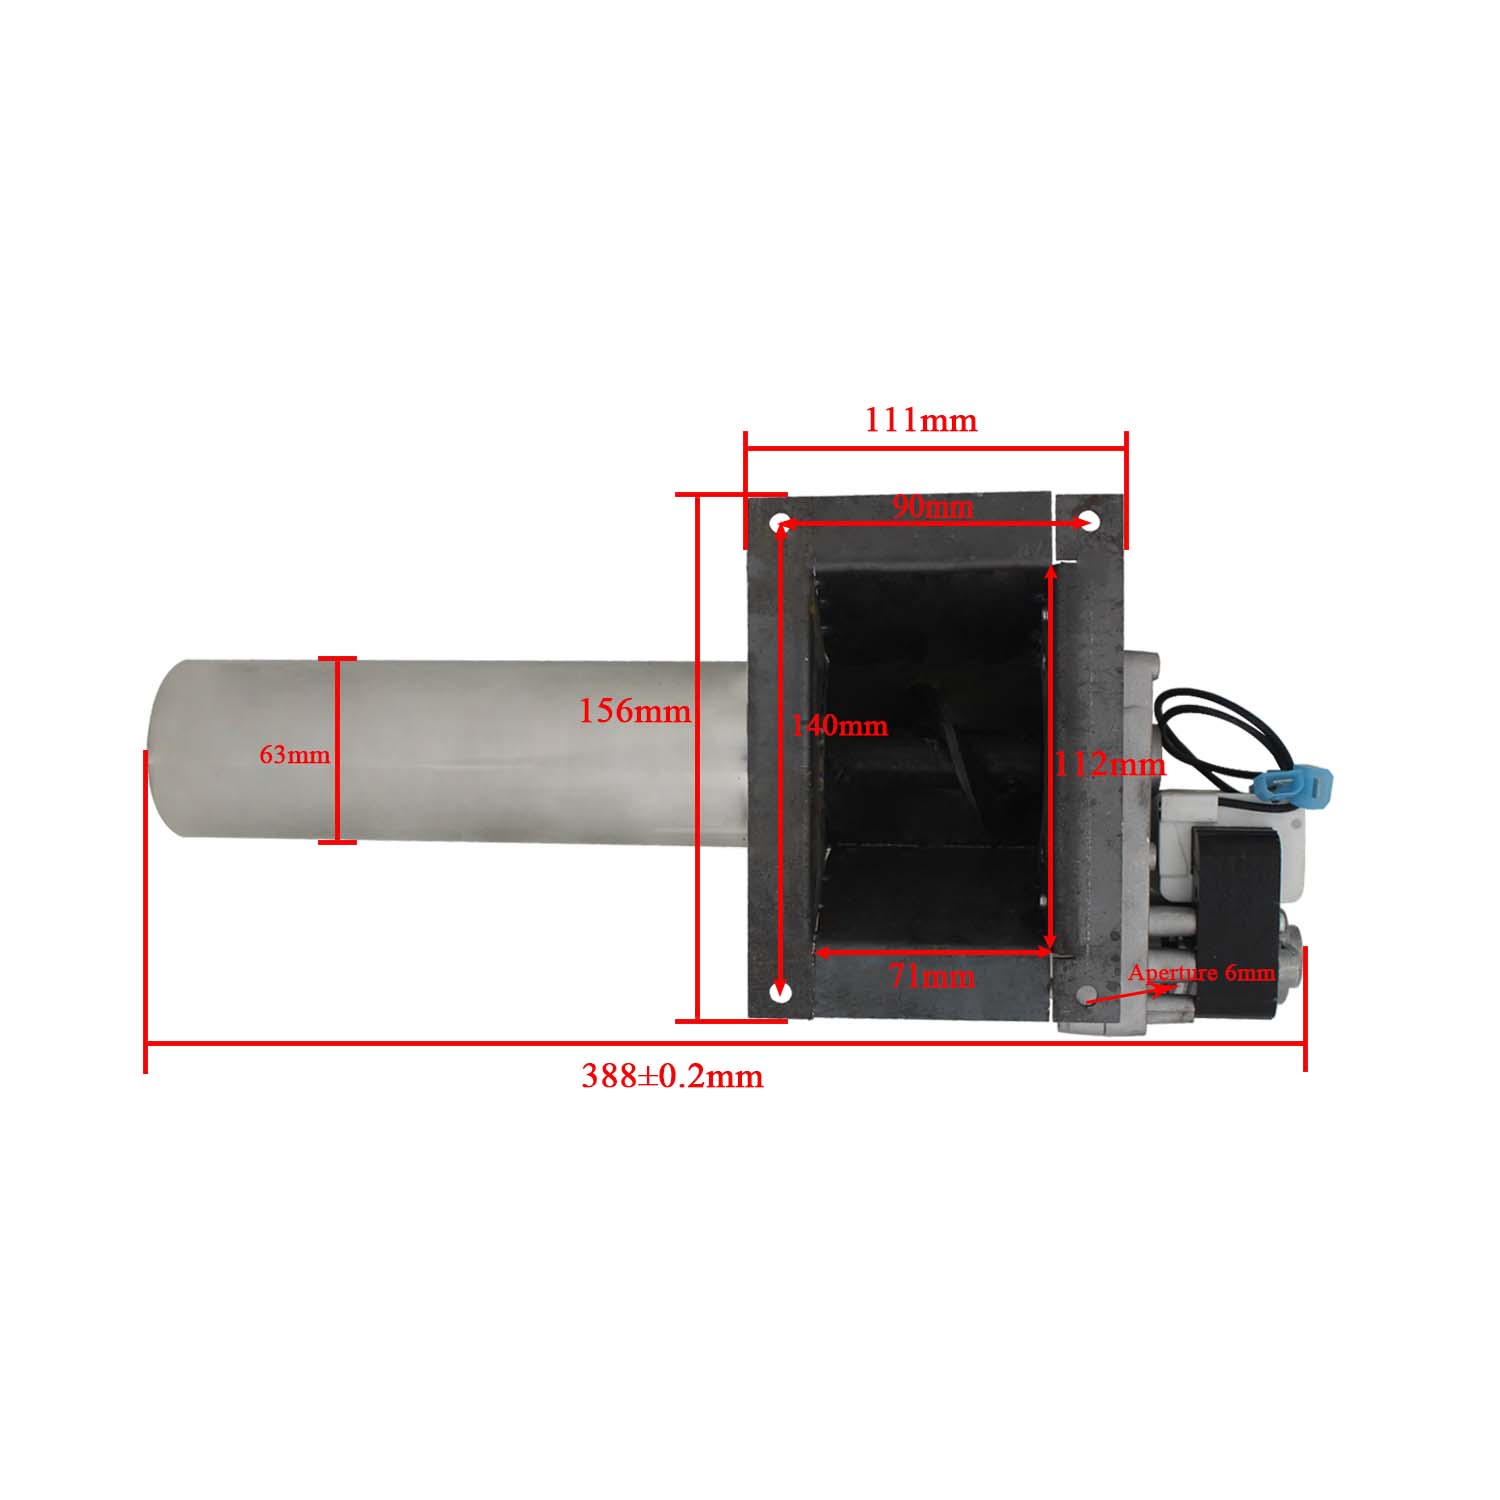 Bios mass wood pellet auger conversion kit with pellet stove auger motor 2 rpm with motor 220v 25w